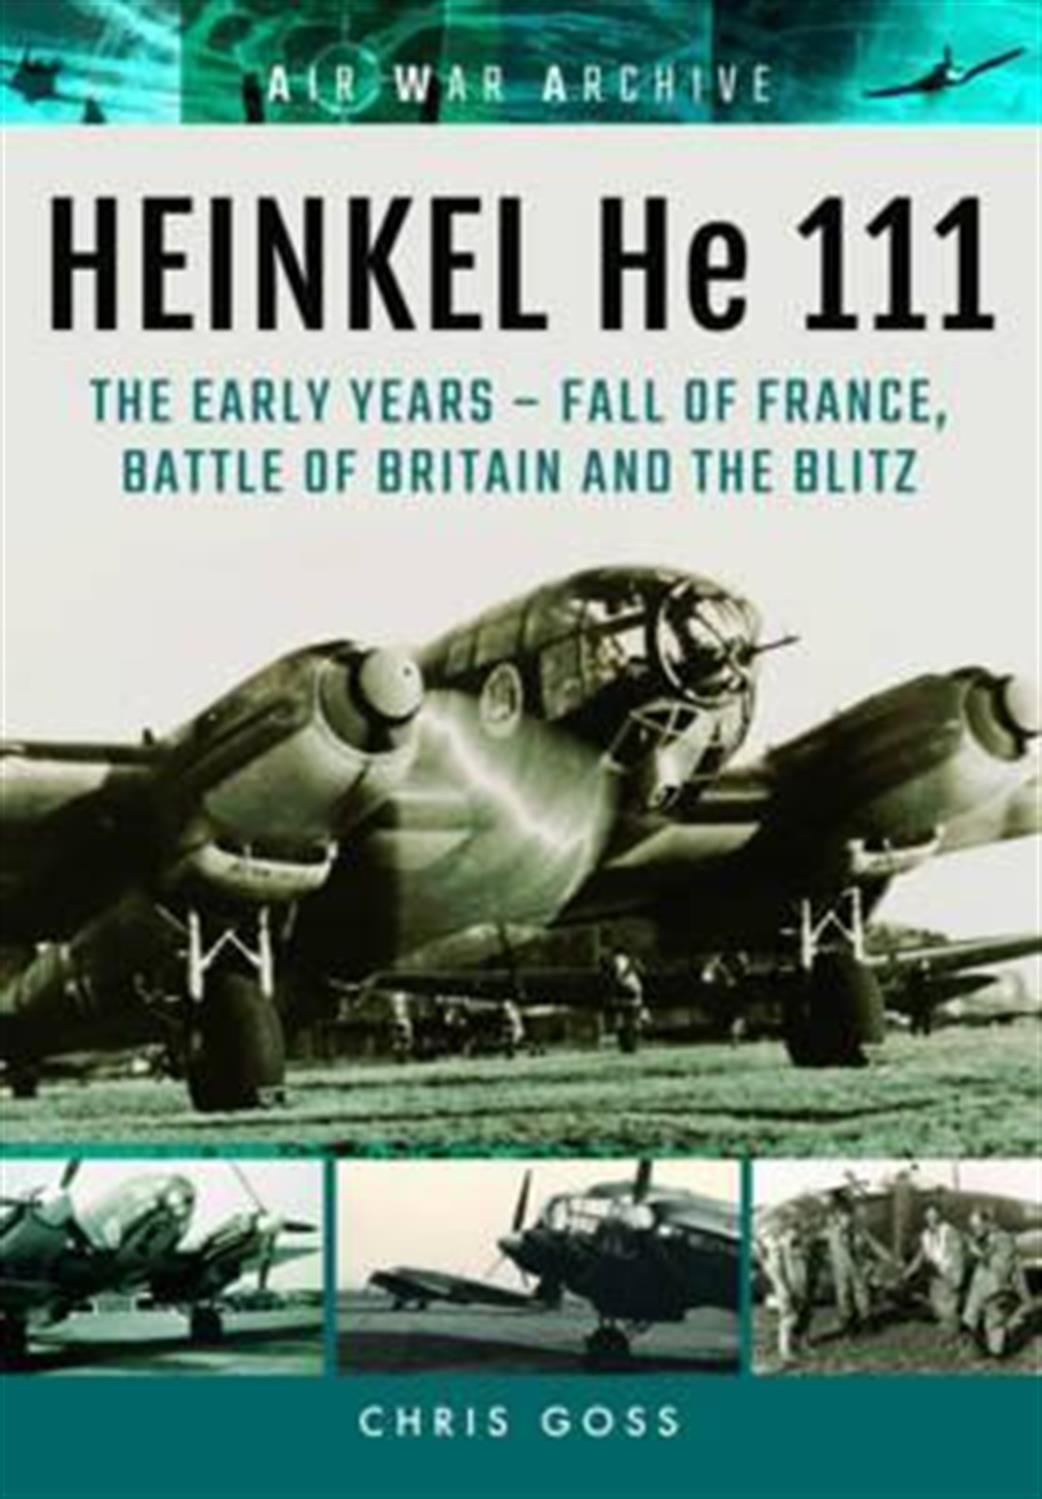 9781848324831 Air War Archive Heinkel He 111 Reference Book by Chris Goss